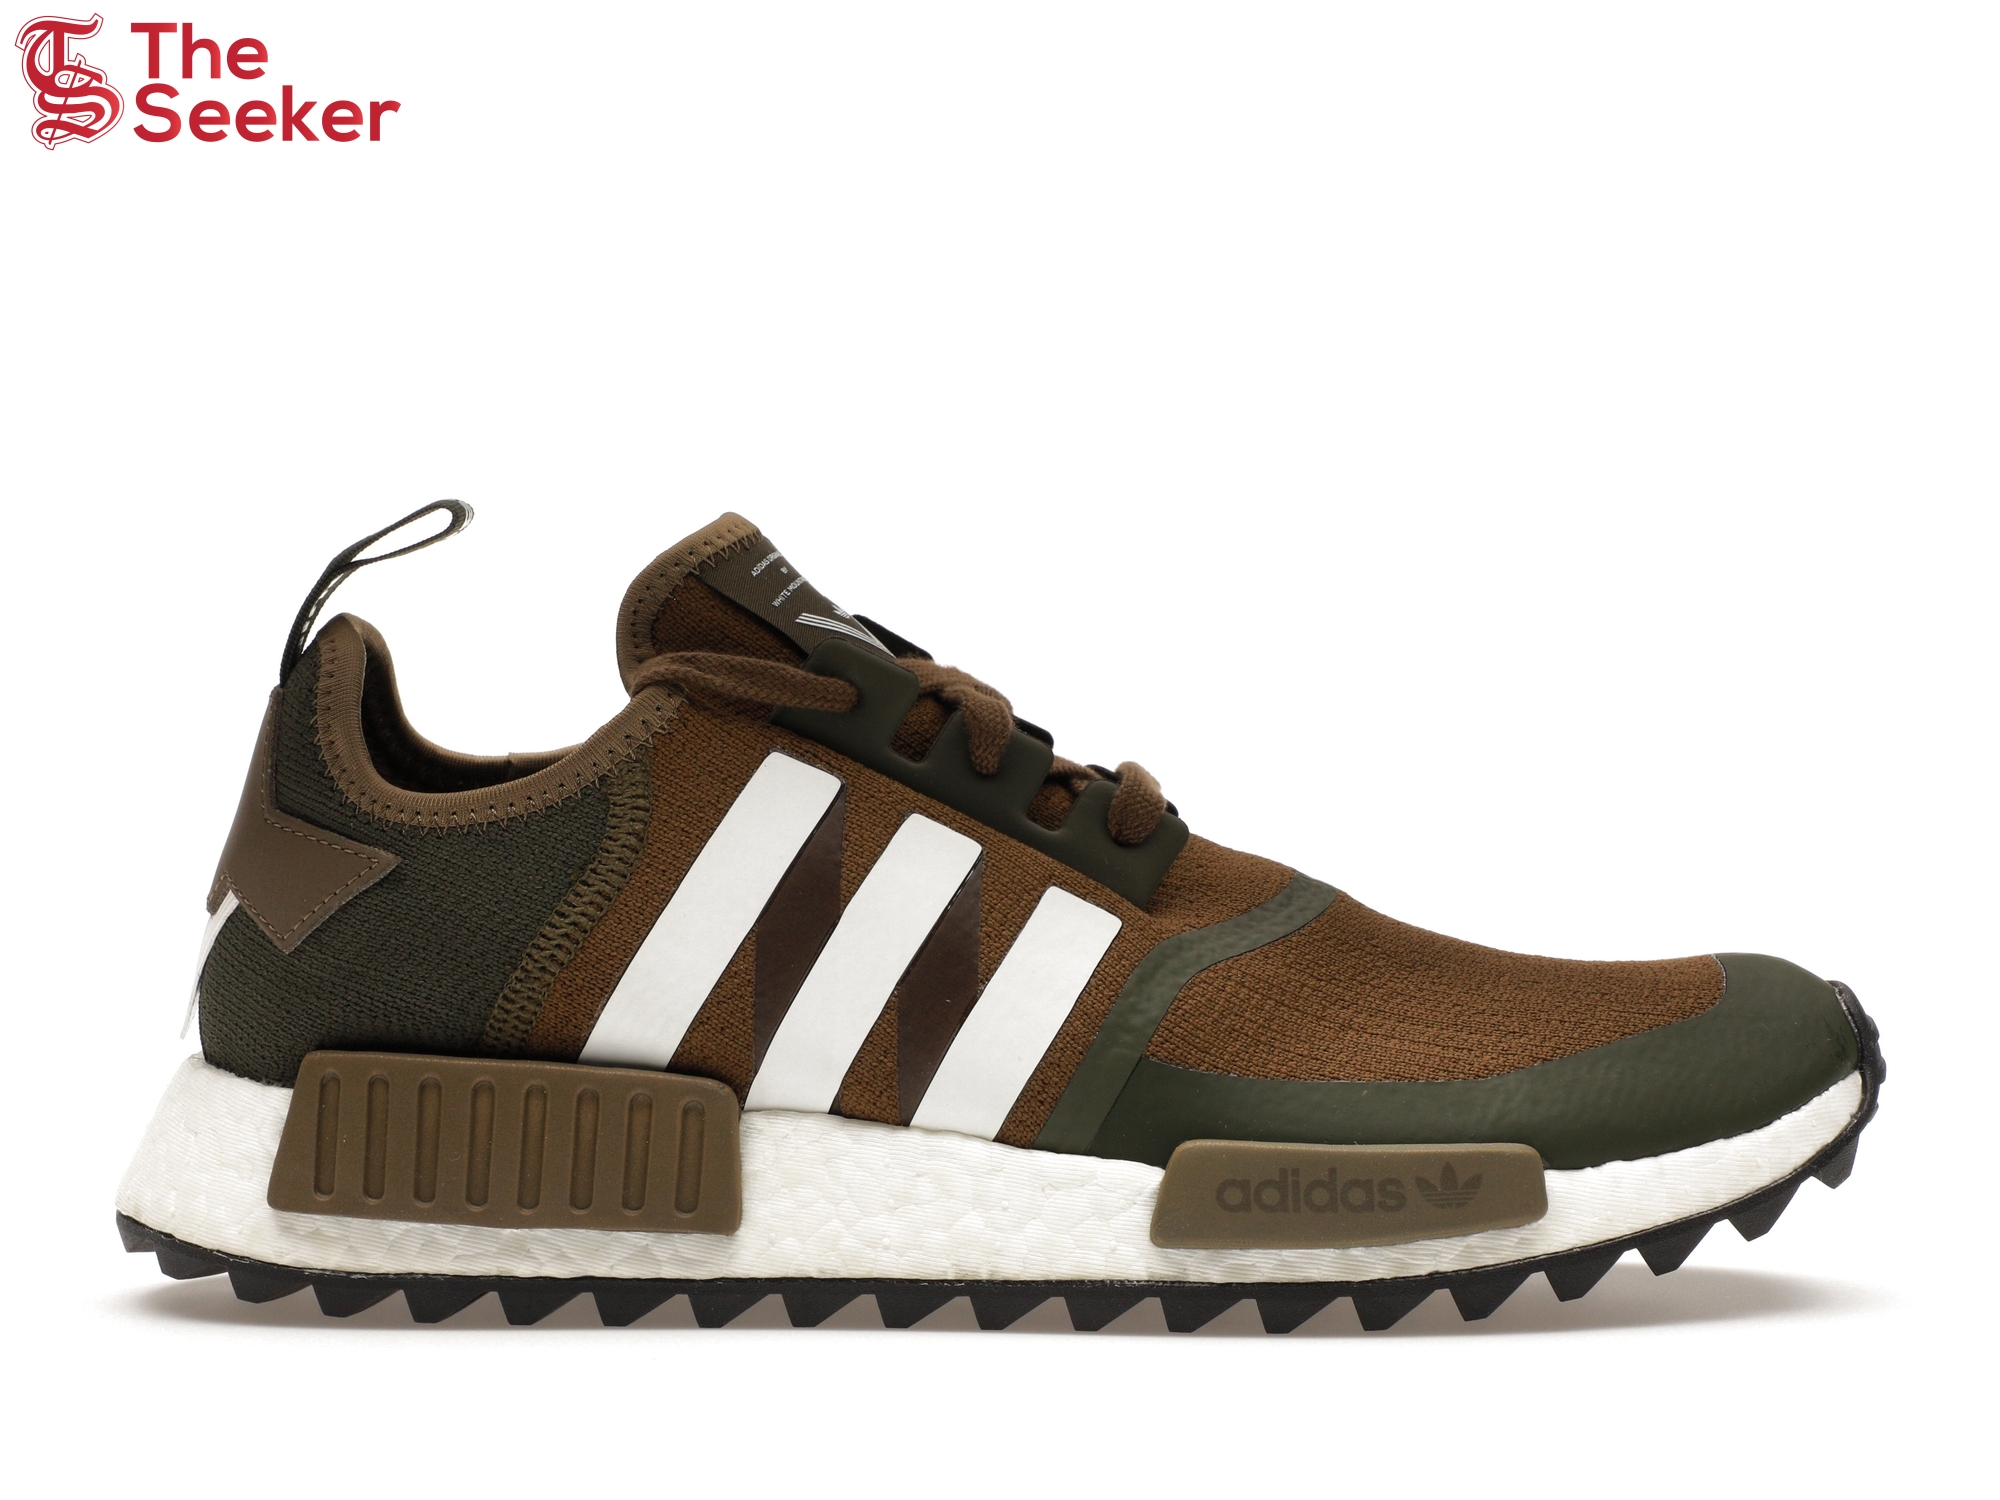 adidas NMD R1 Trail White Mountaineering Trace Olive